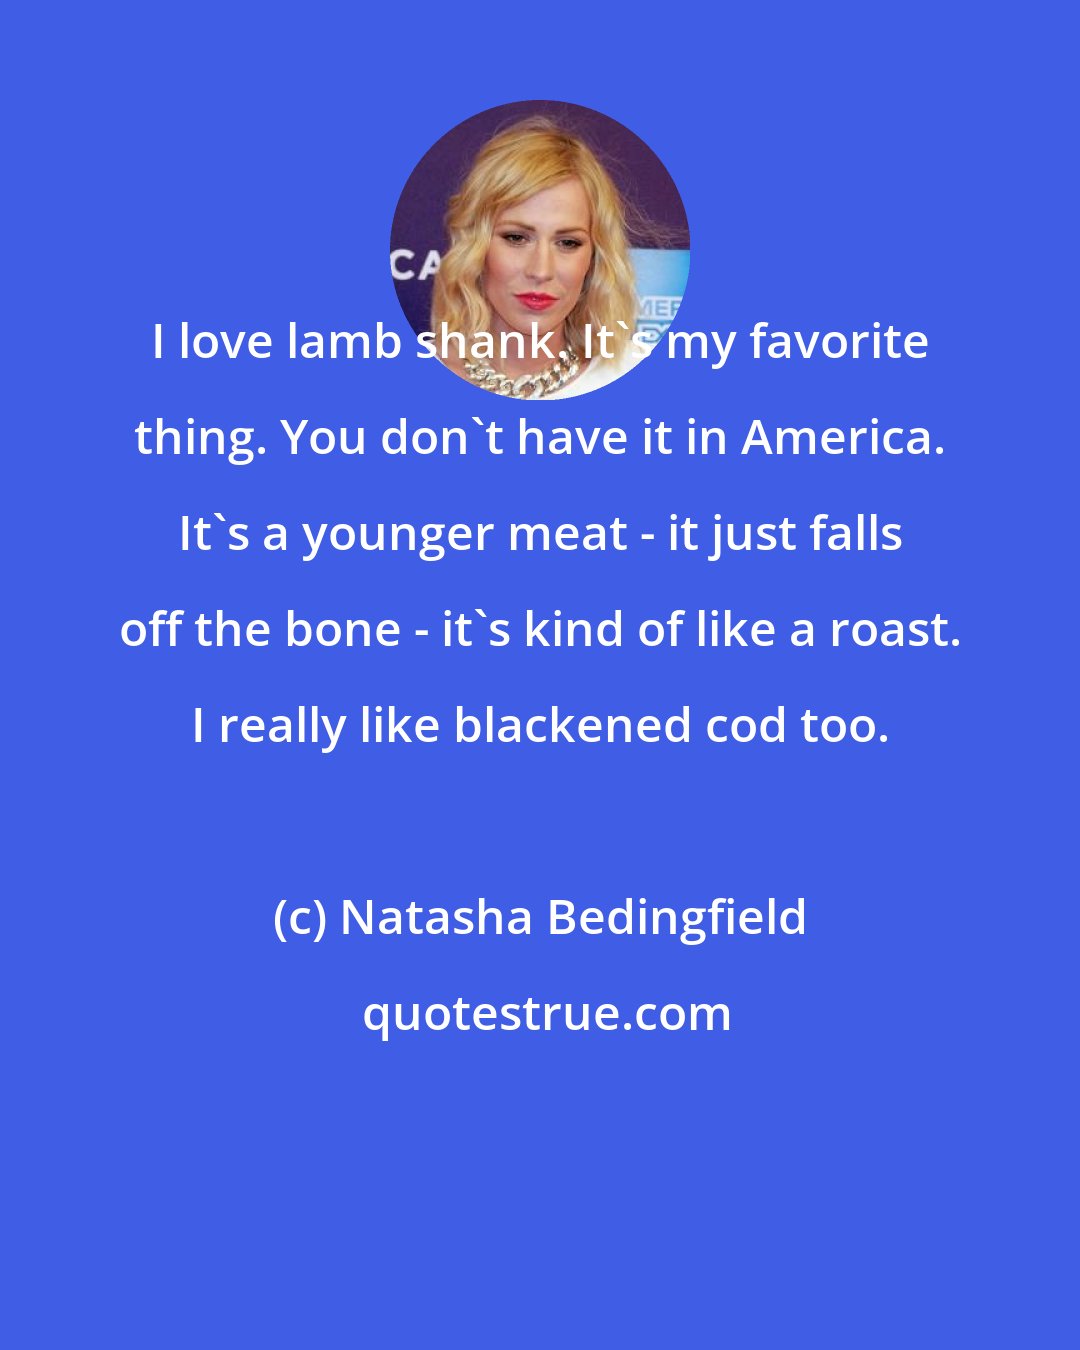 Natasha Bedingfield: I love lamb shank. It's my favorite thing. You don't have it in America. It's a younger meat - it just falls off the bone - it's kind of like a roast. I really like blackened cod too.